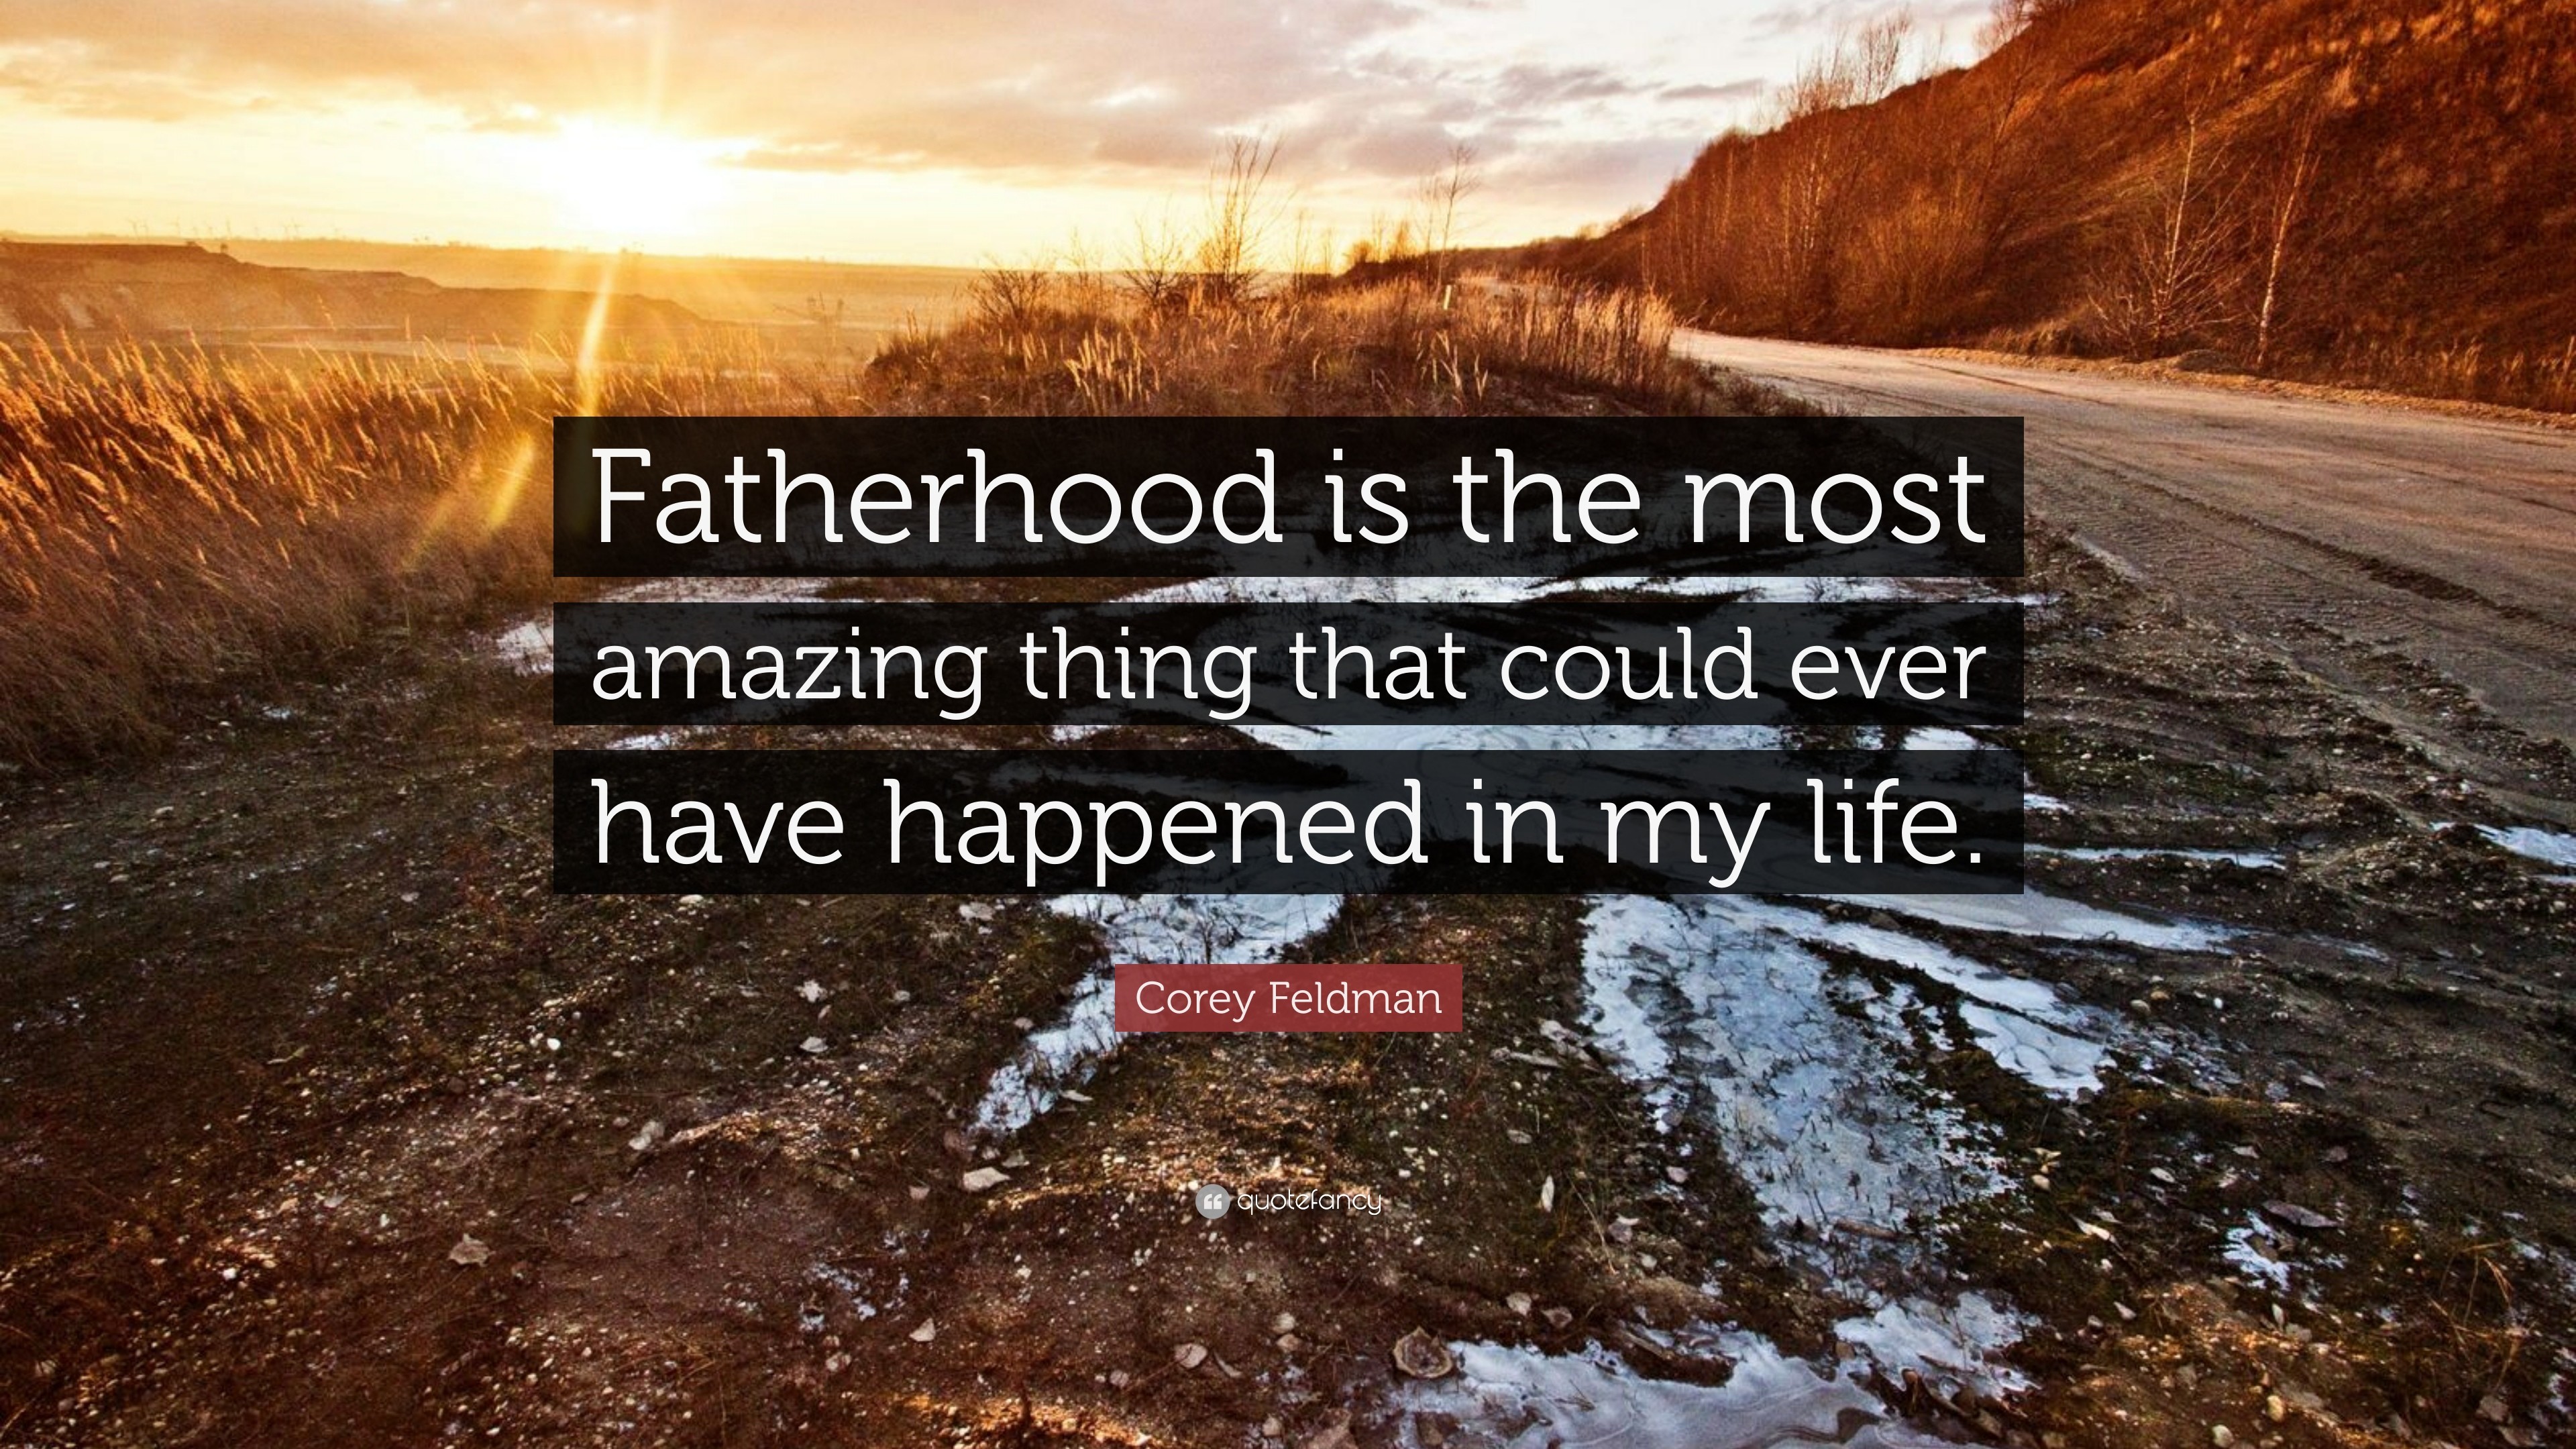 3840x2160 Corey Feldman Quote: “Fatherhood is the most amazing thing that could ever  have happened